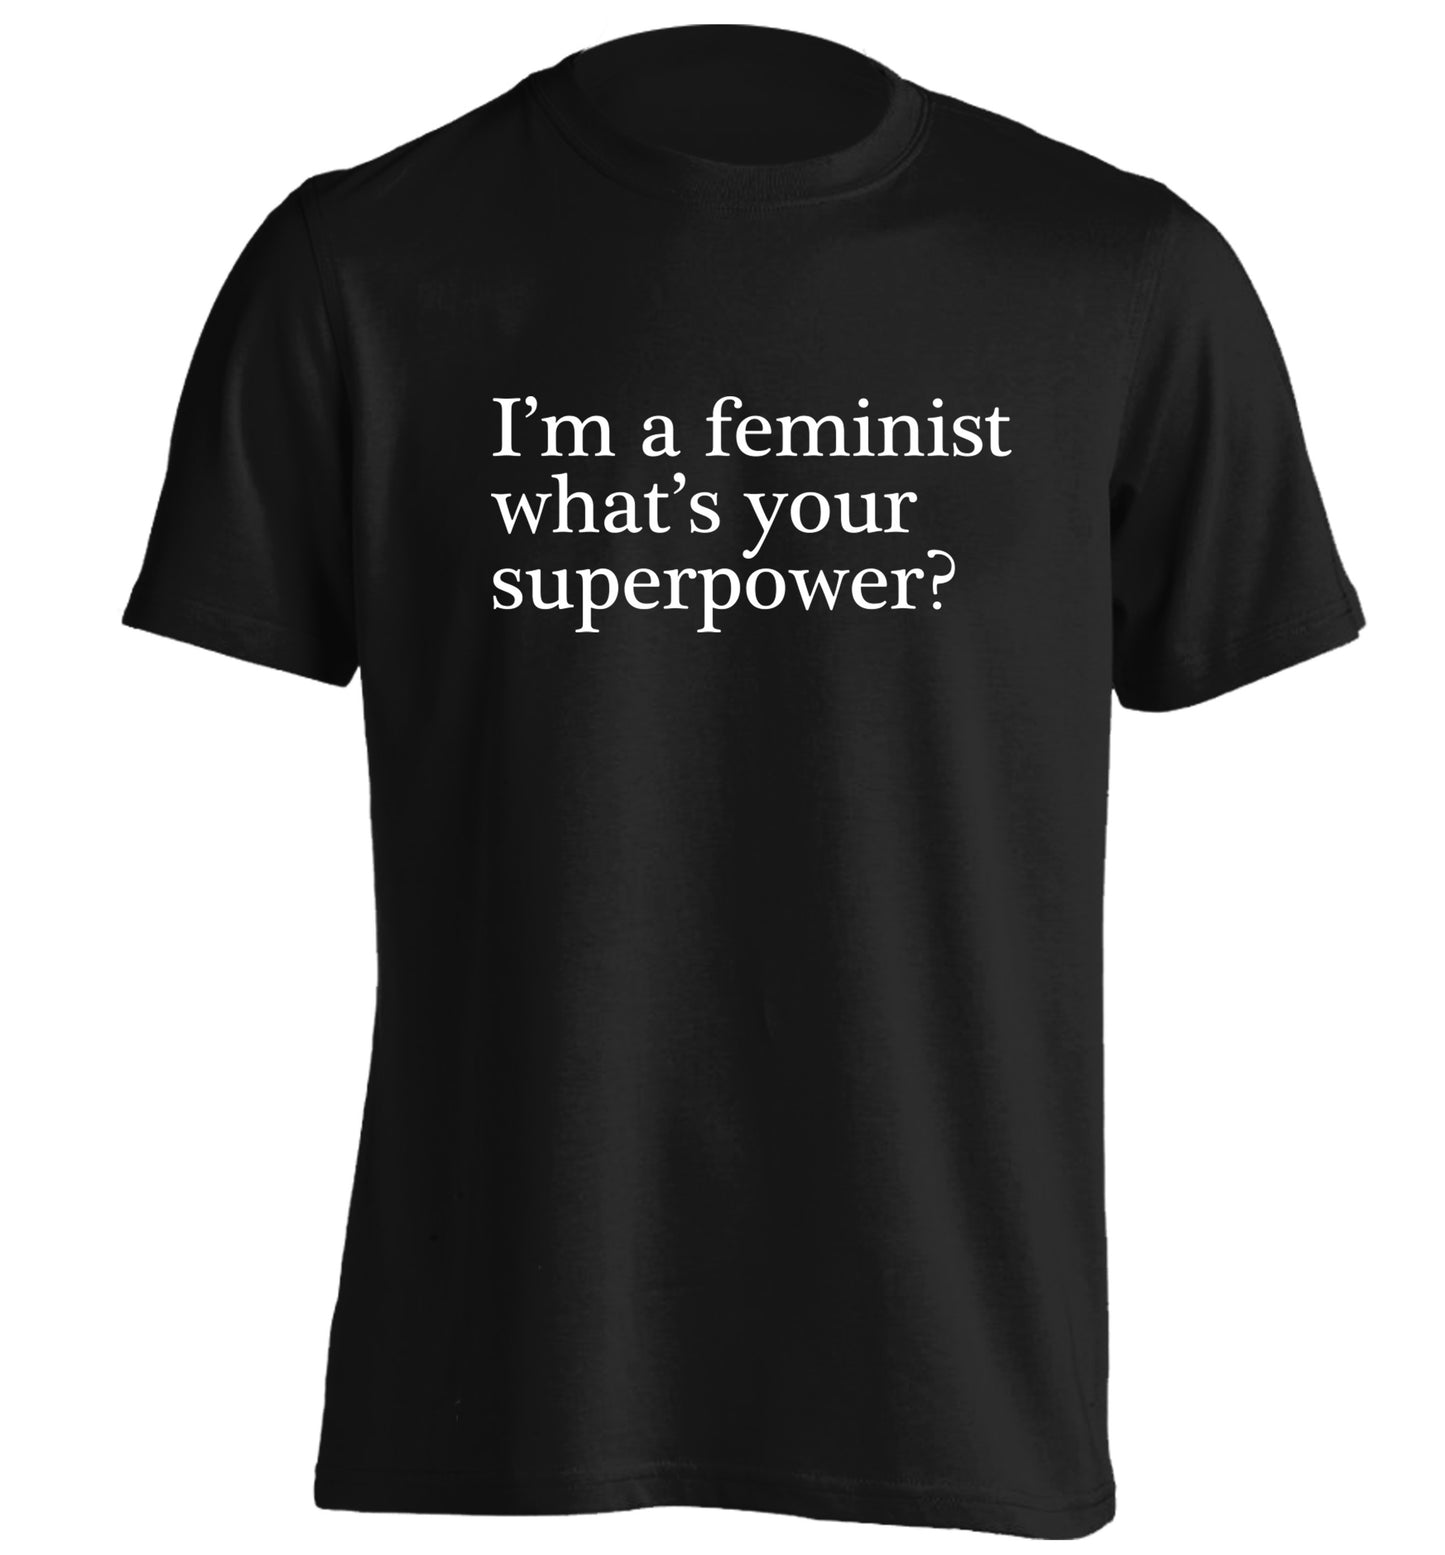 I'm a feminist what's your superpower? adults unisex black Tshirt 2XL